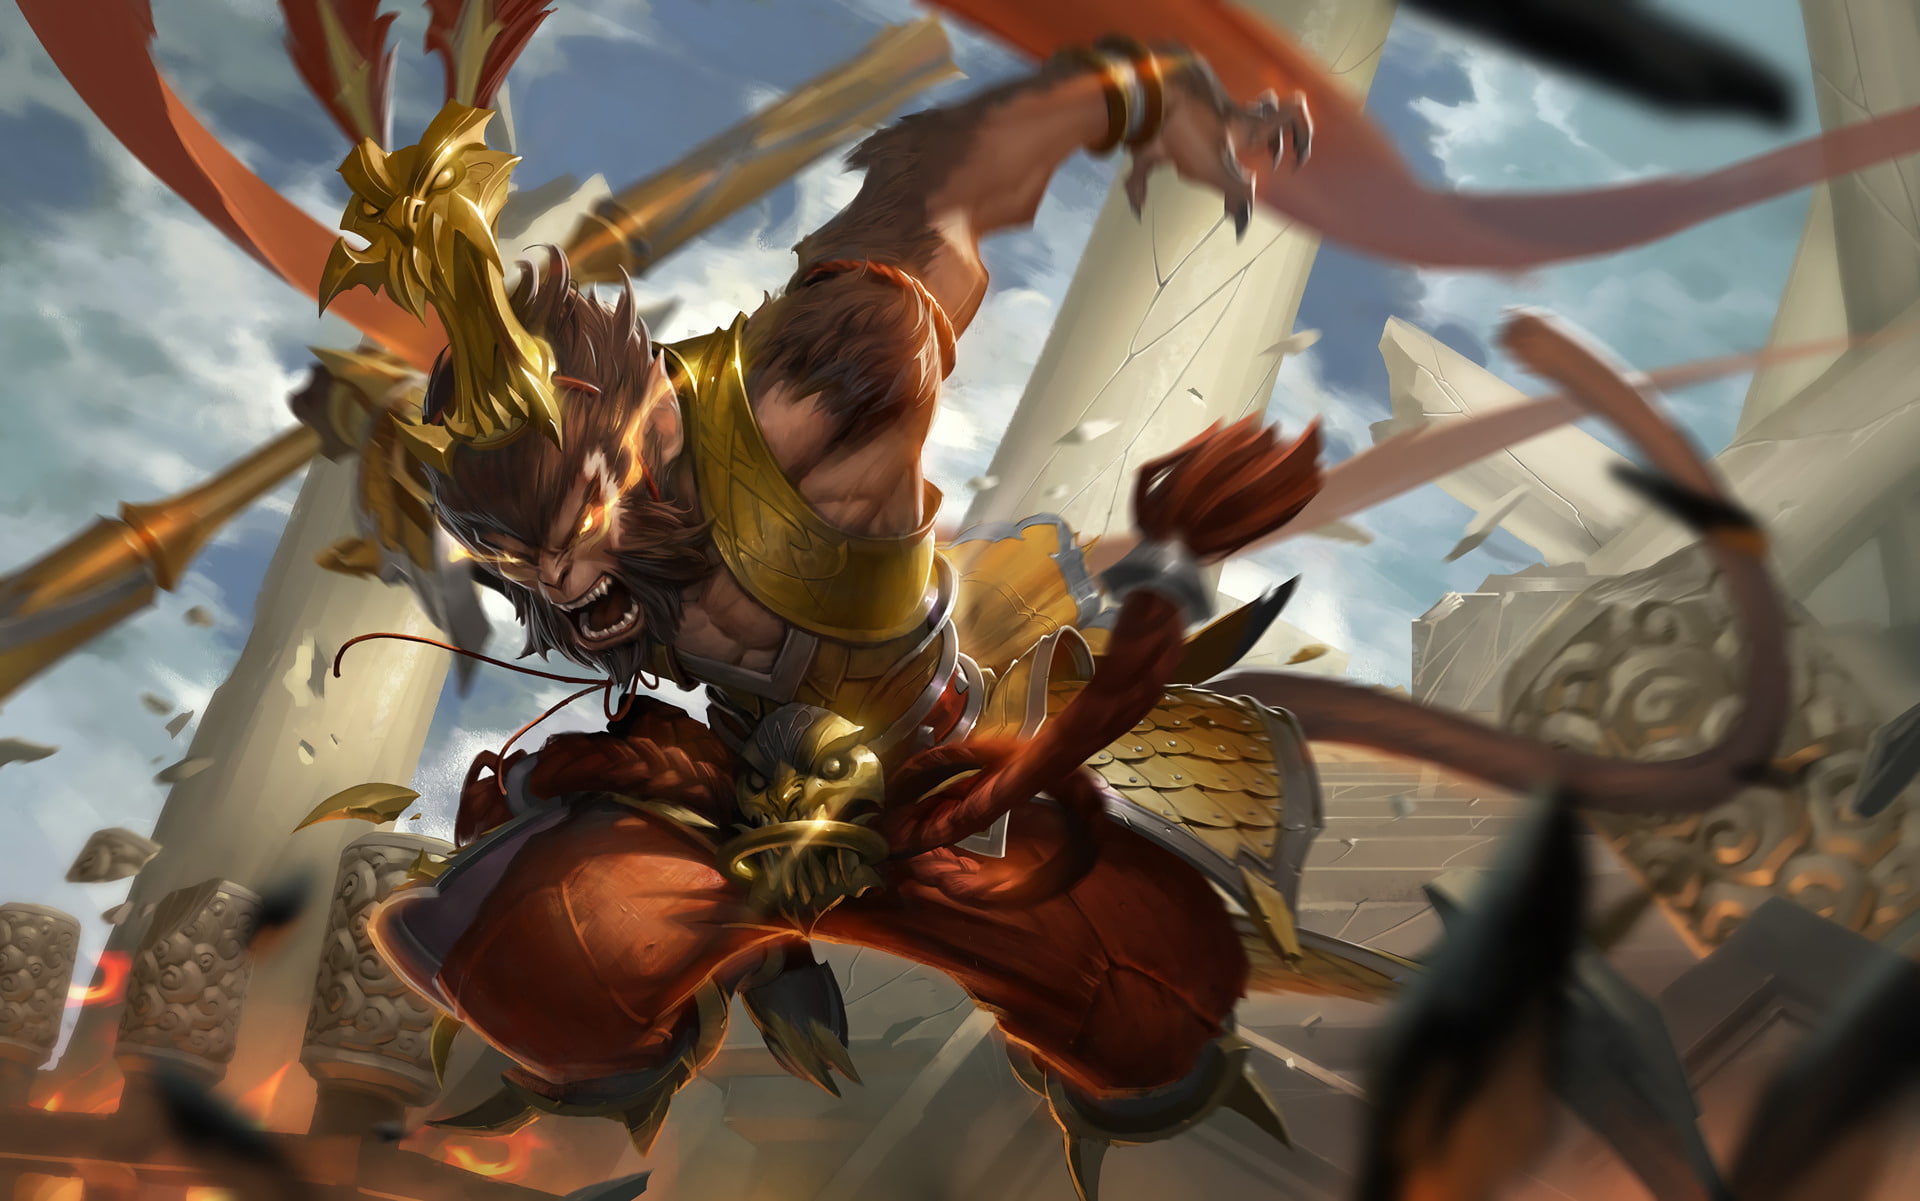 league of legends wukong, group of people, transportation, arts culture and entertainment